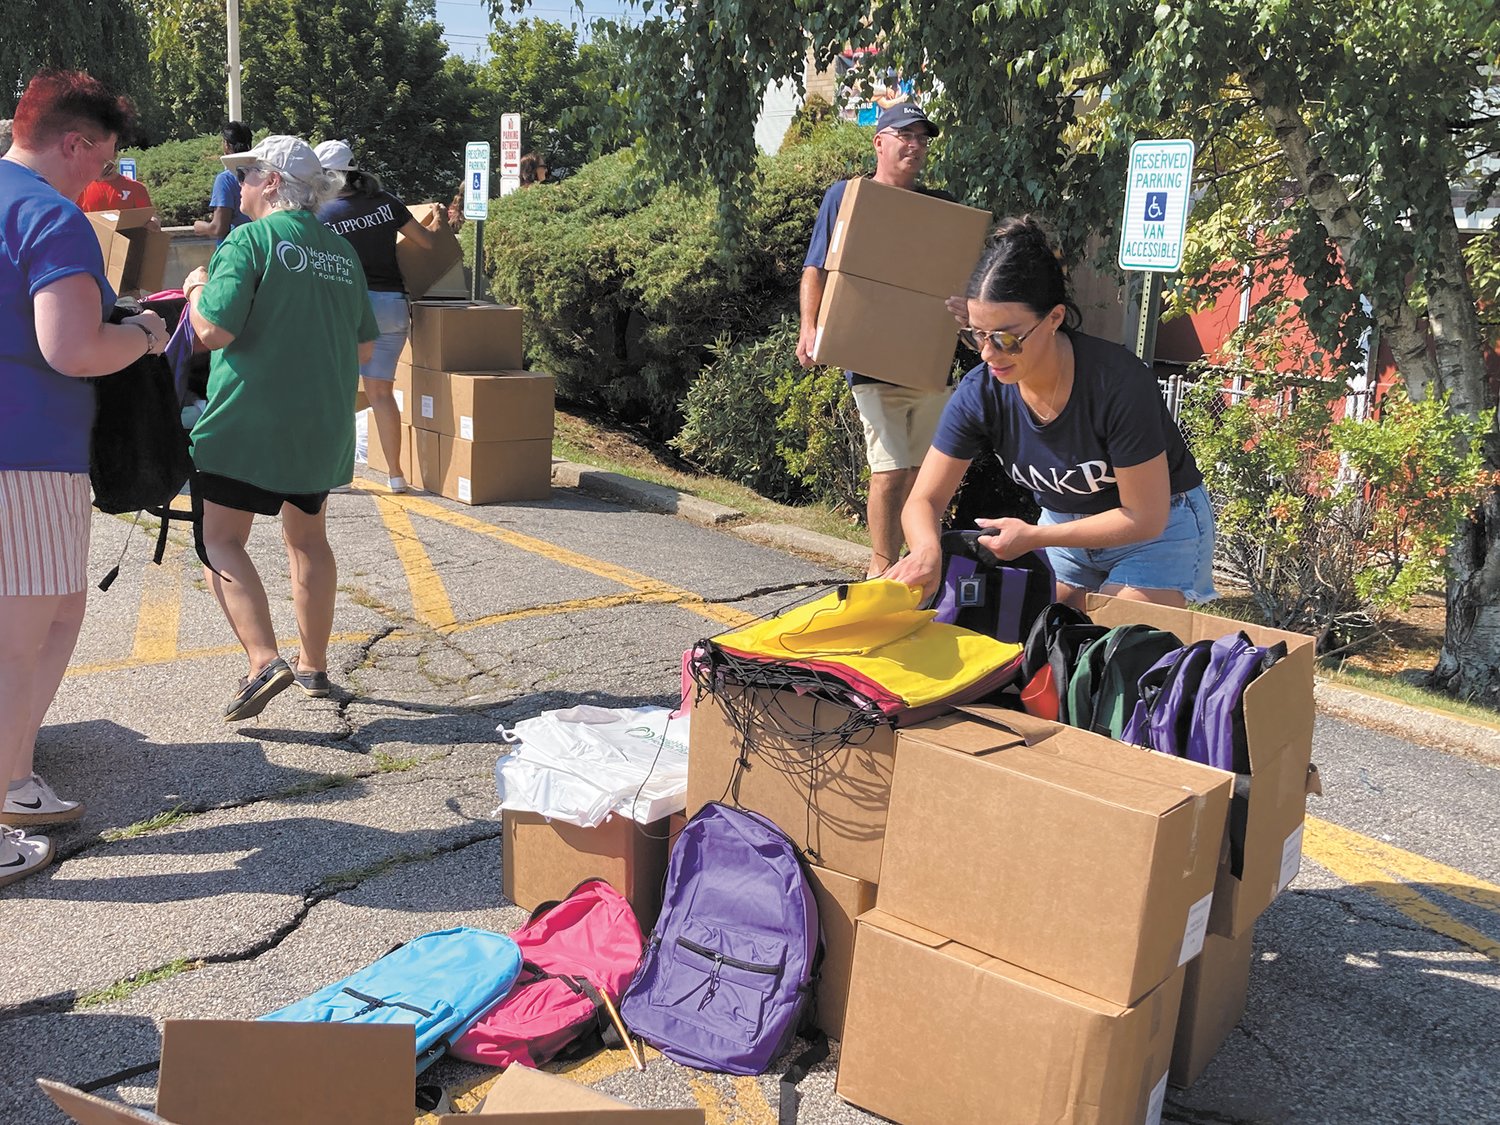 FILLING THEM WITH SUPPLIES: Backpacks were filled with pens, pencils, highlighters, notebooks, folders, a pencil sharpener and more. (Herald photo)